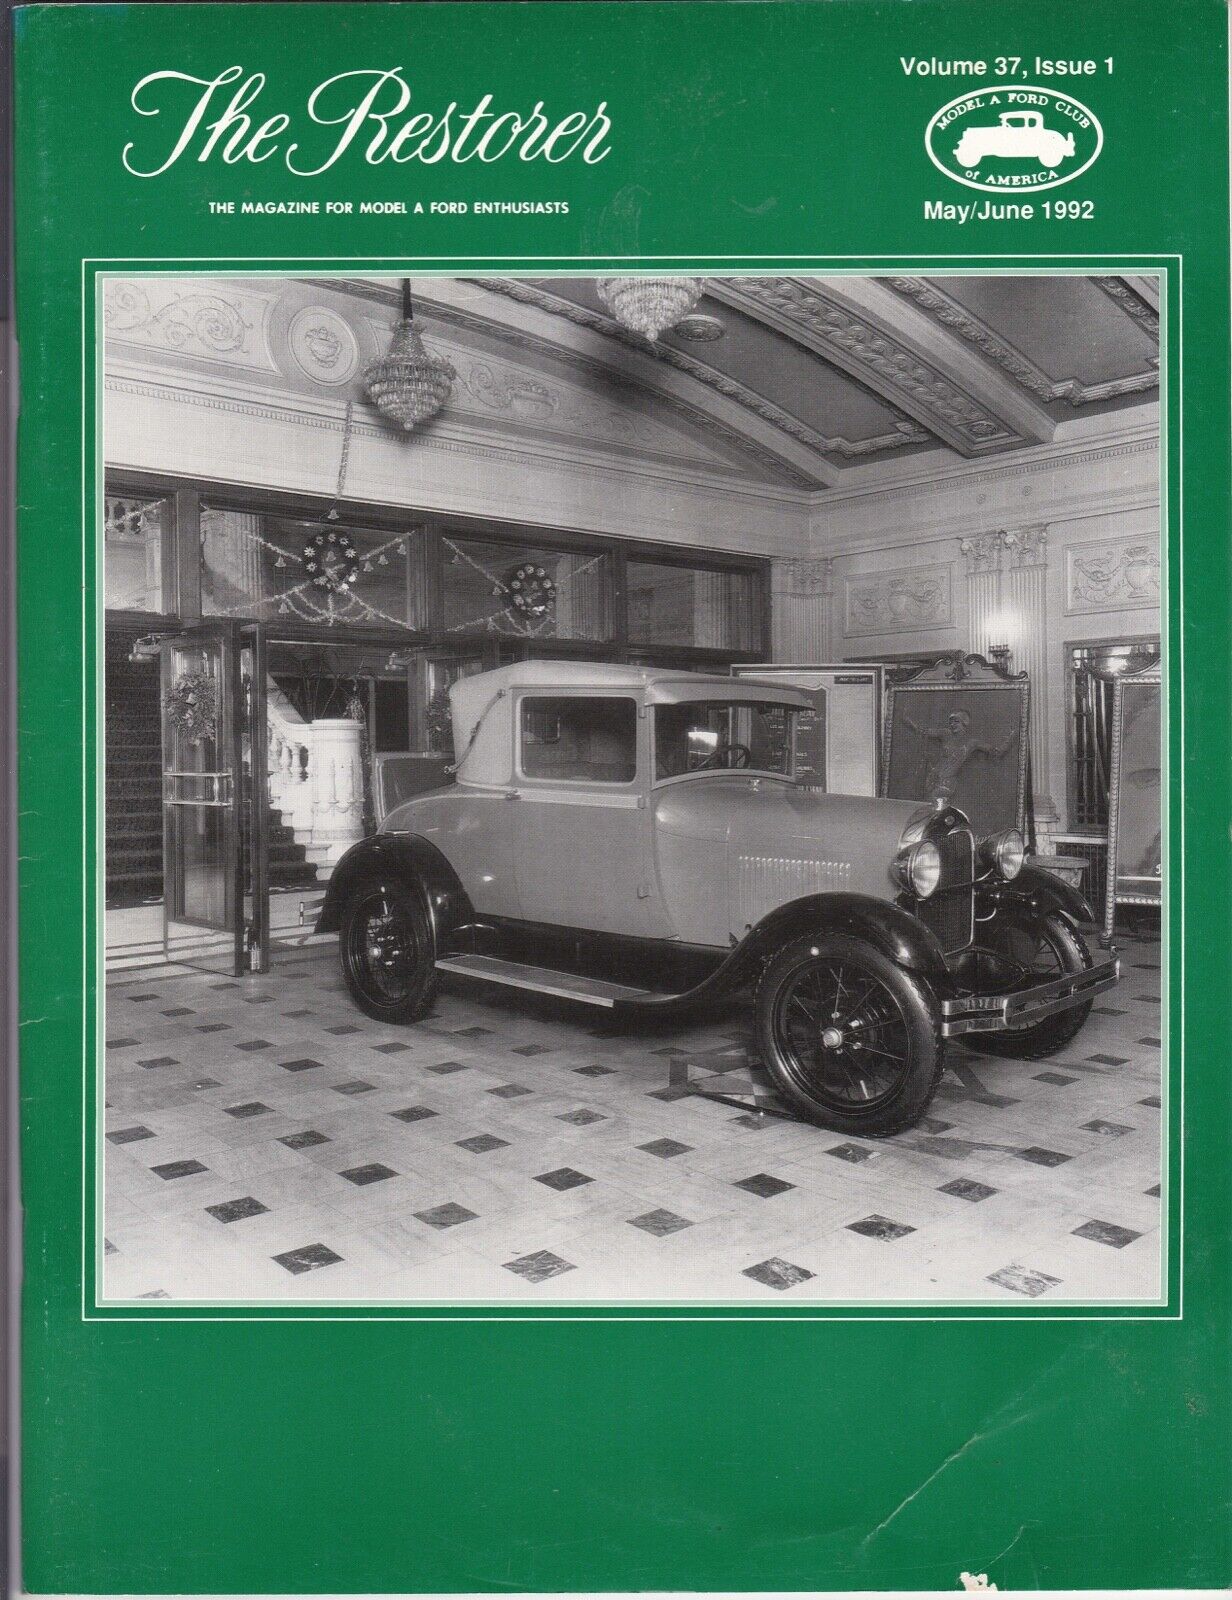 1928 SPORT COUPE - THE VINTAGE FORD MAGAZINE - MAY, JUNE VOLUME 37 ISSUE 1 1992 